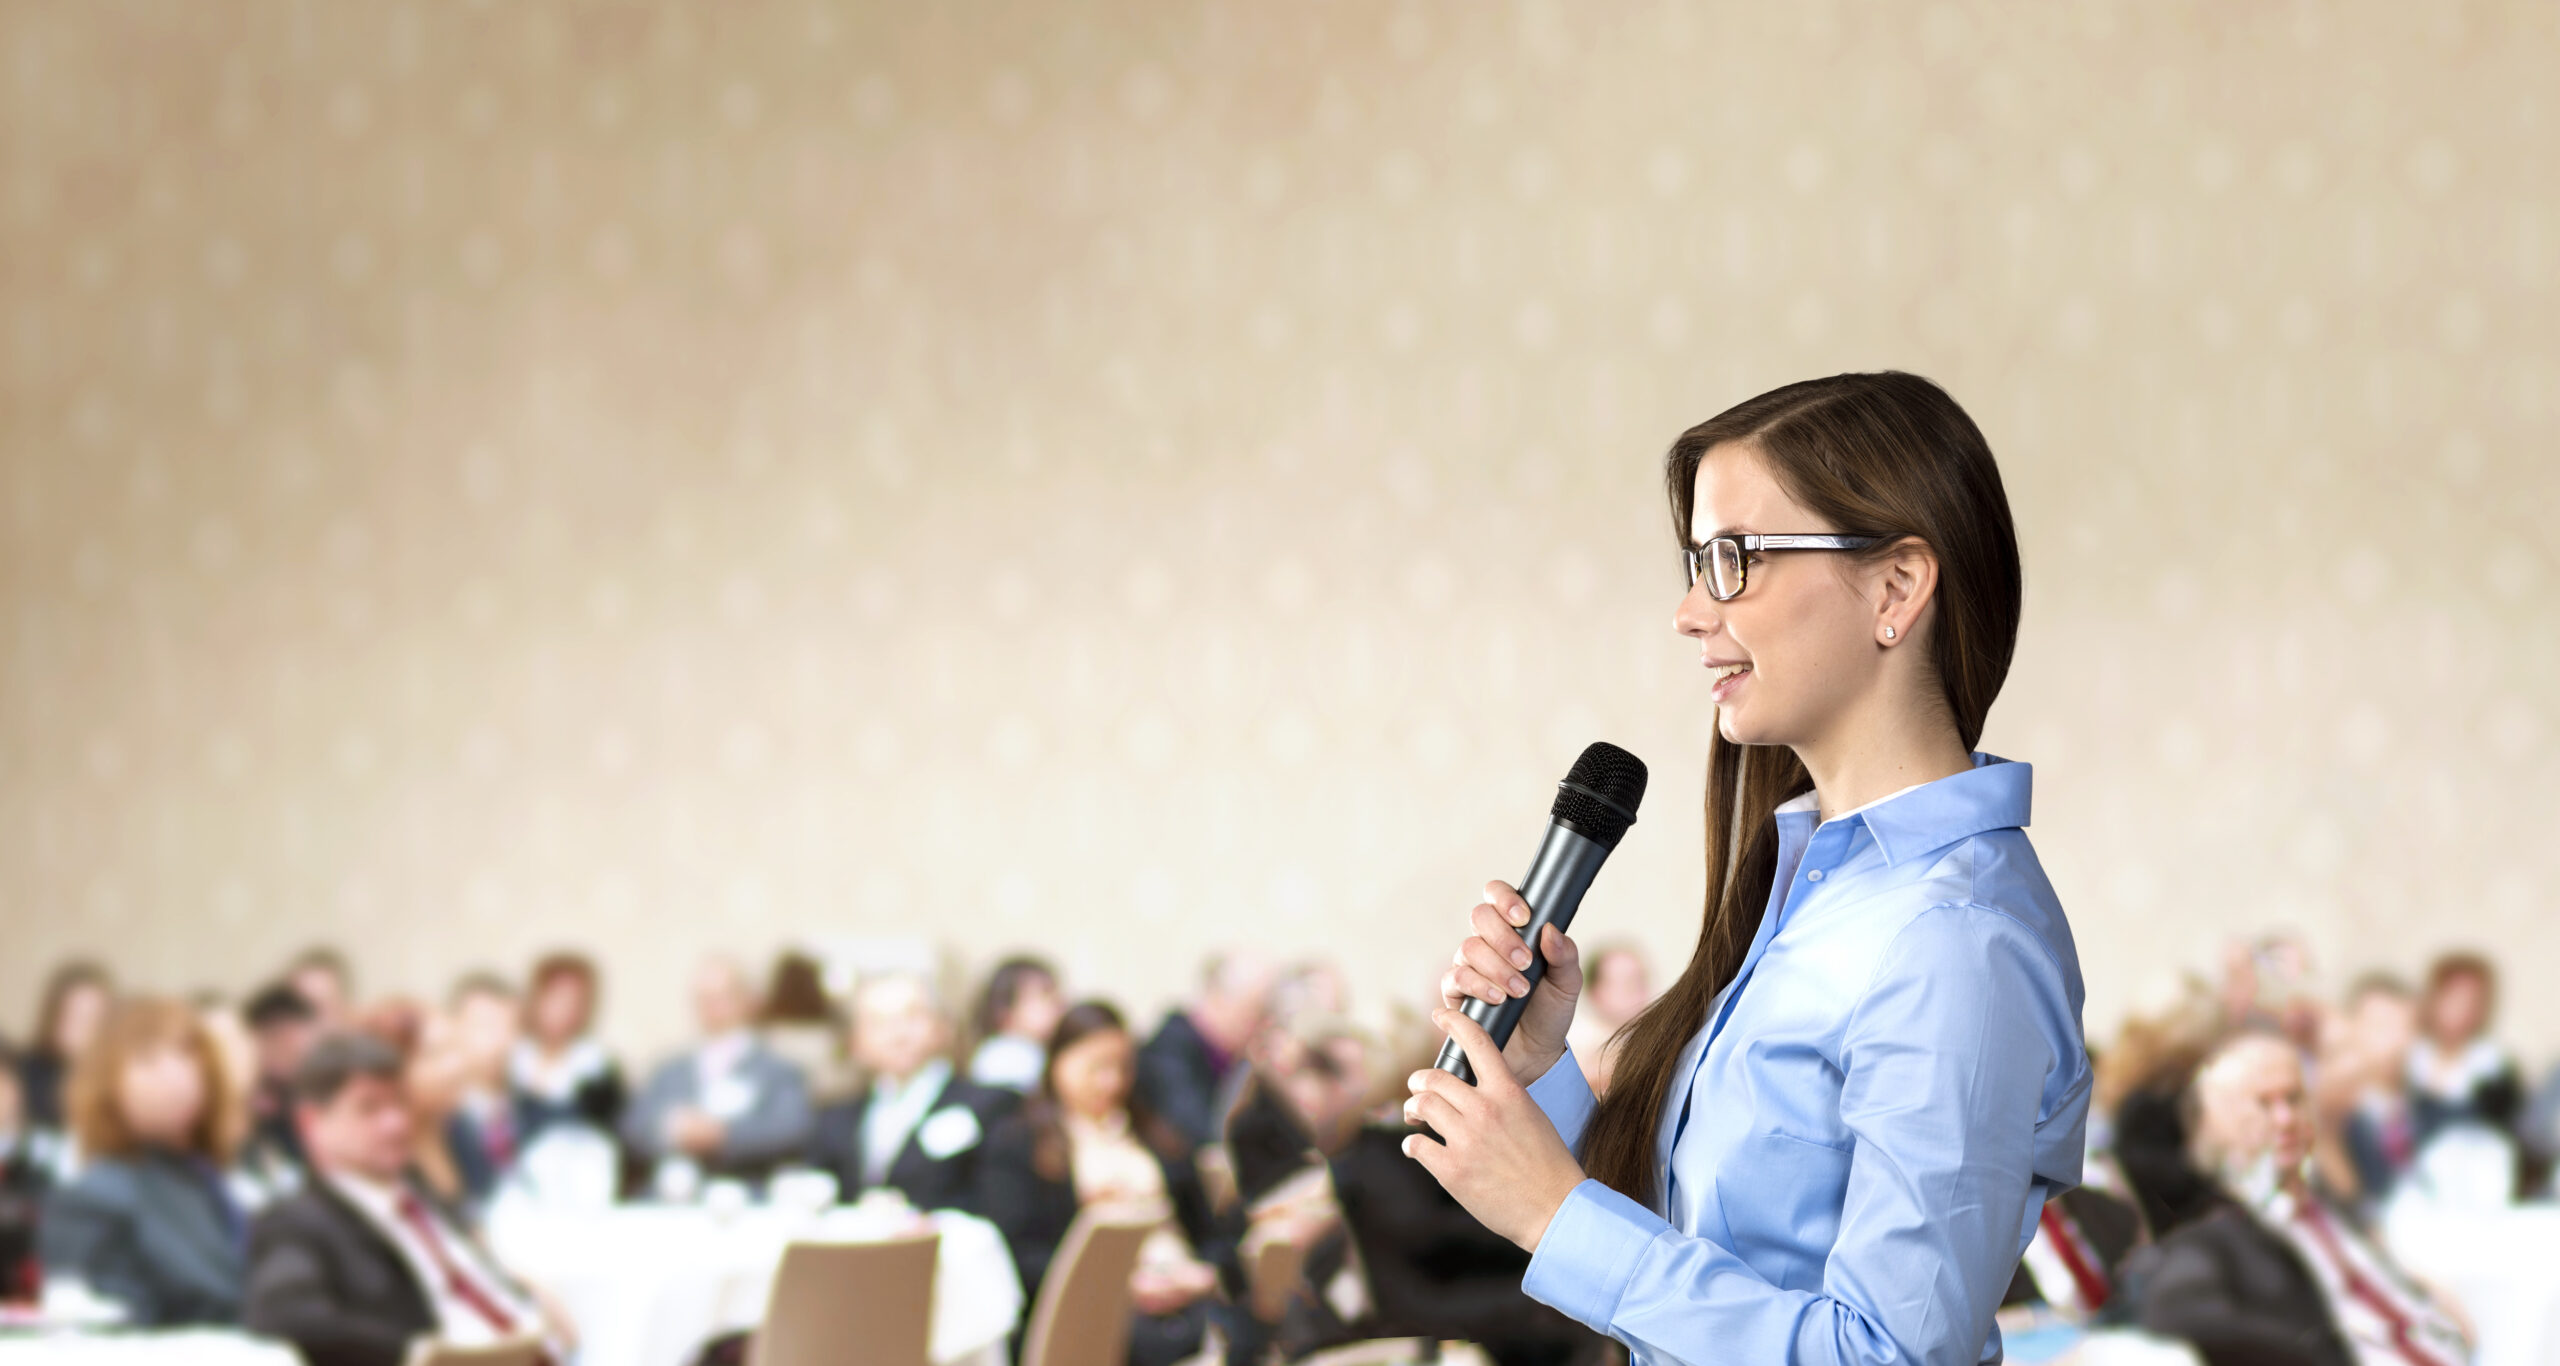 Nonprofit Storytelling at a Fundraiser: Asking a Customer to Speak